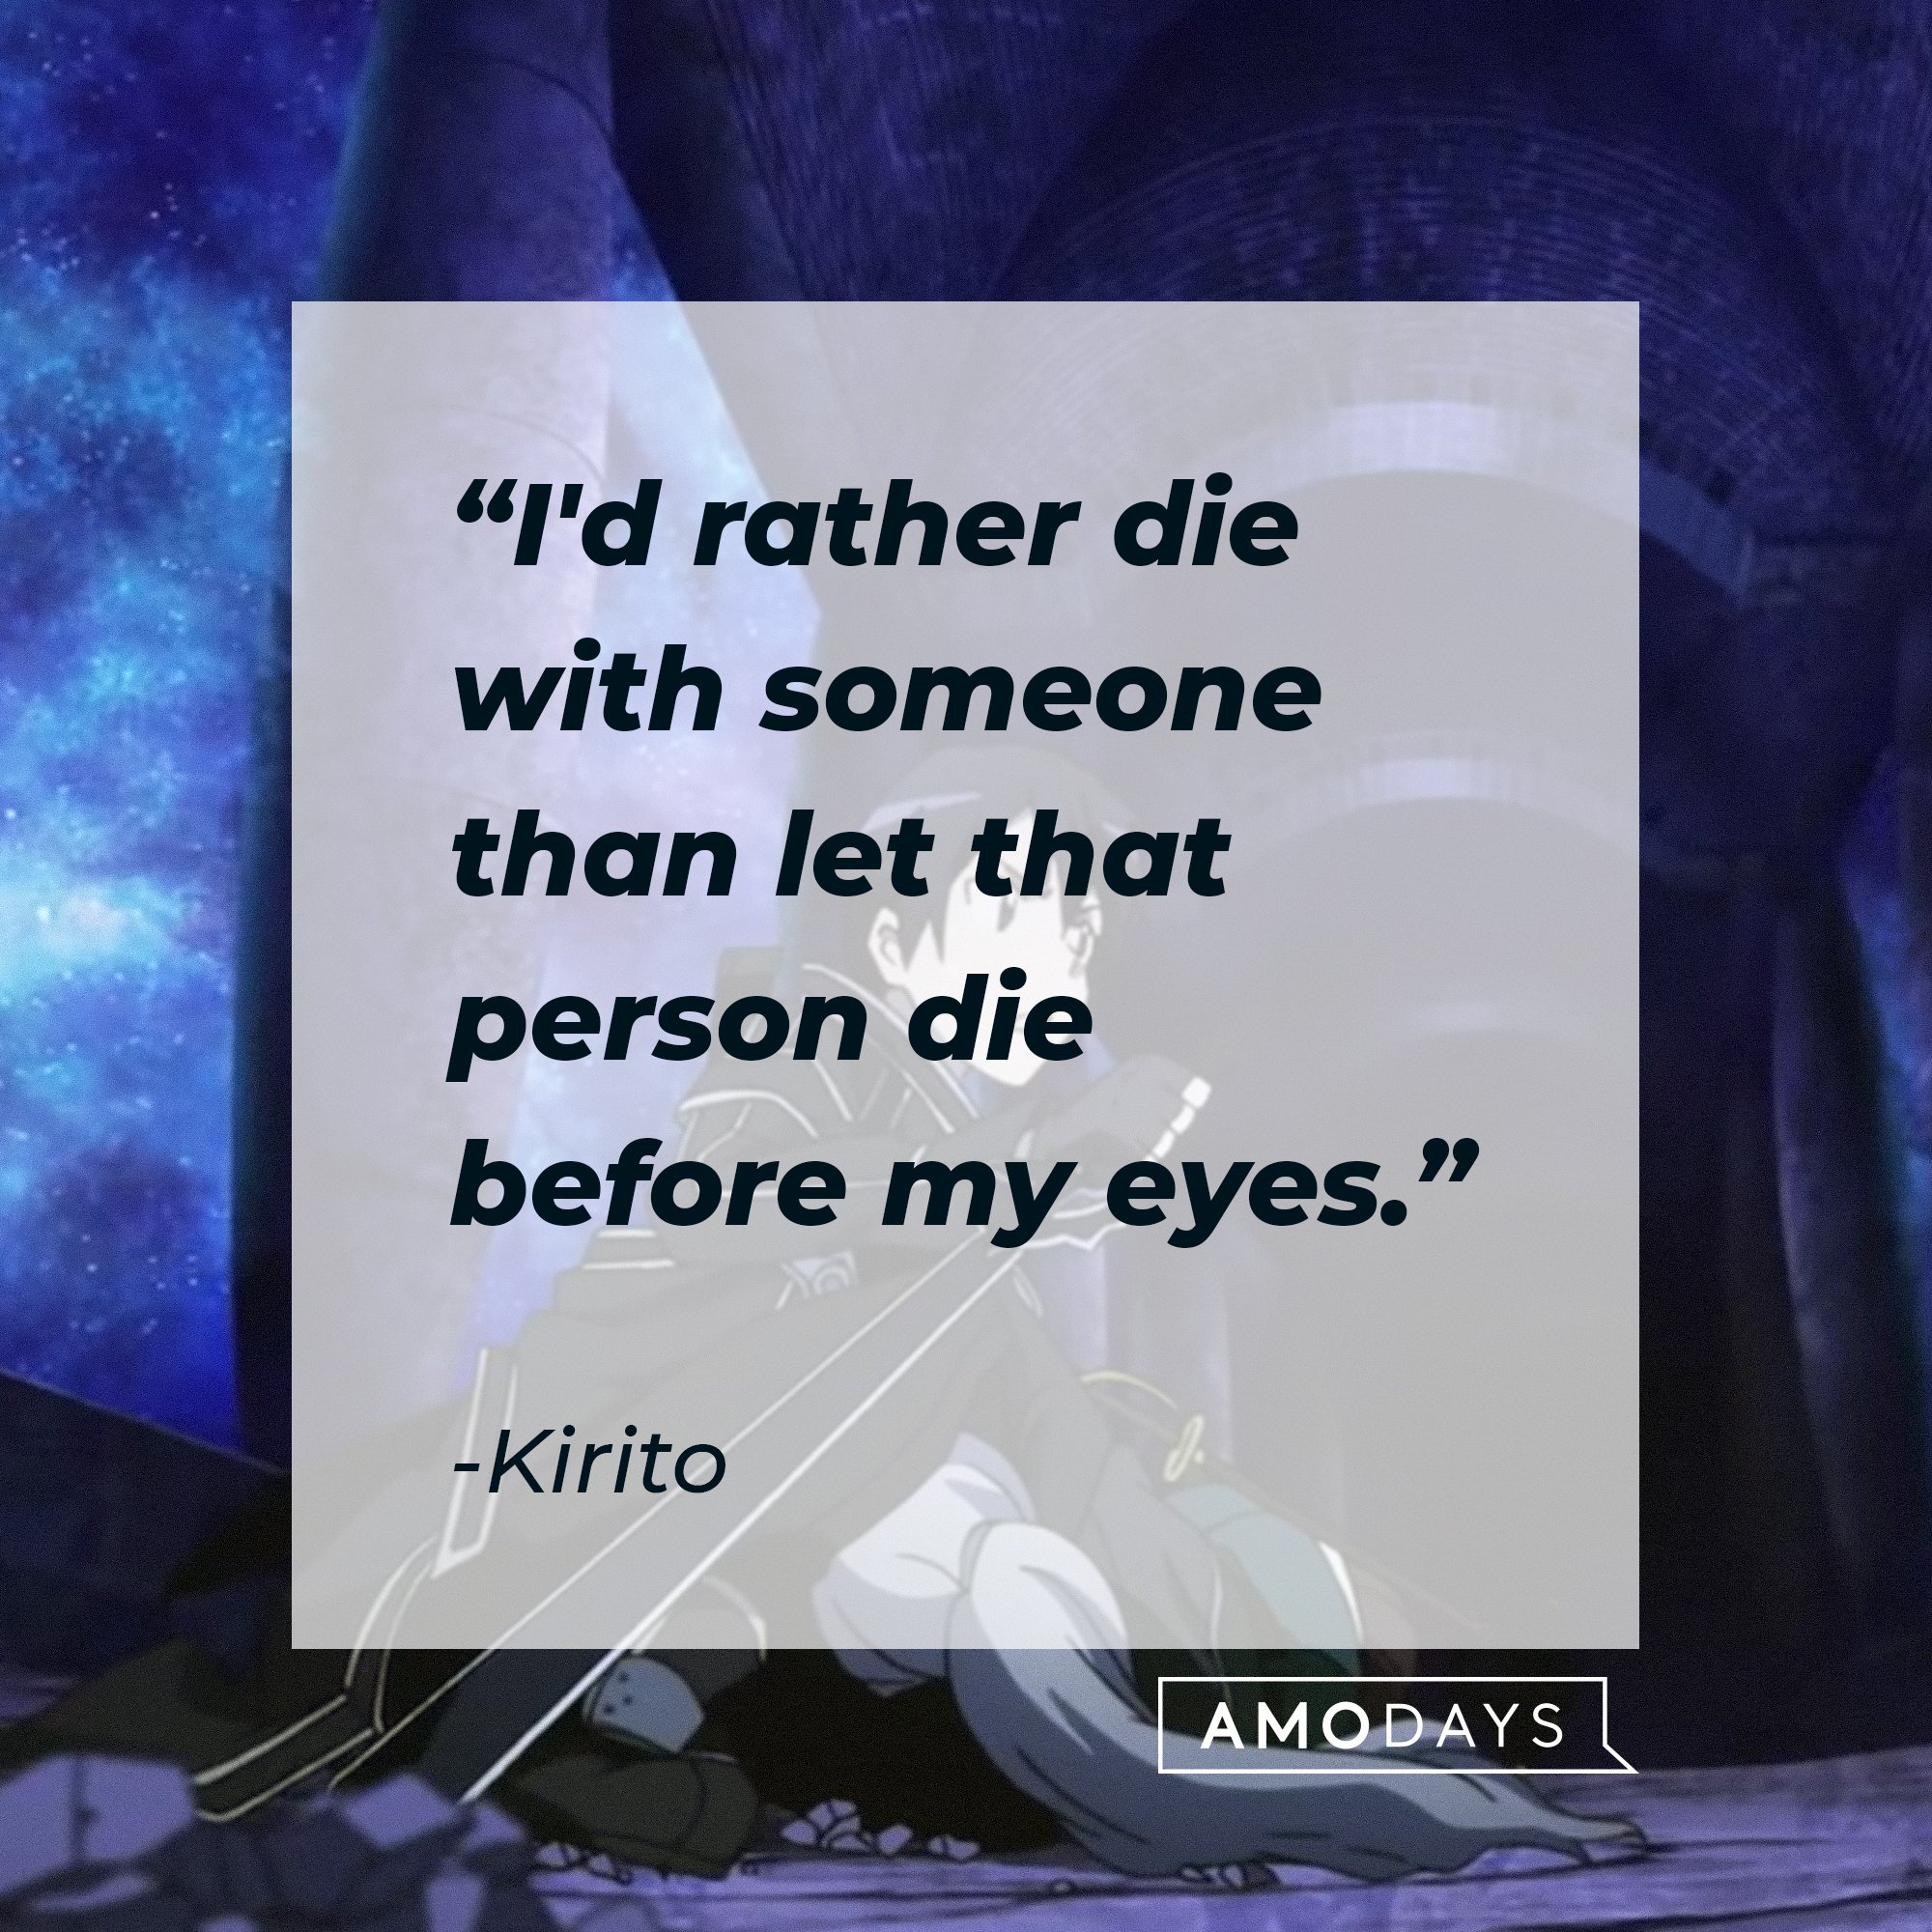 Kirito’s quote: "I'd rather die with someone than let that person die before my eyes." | Image: AmoDays